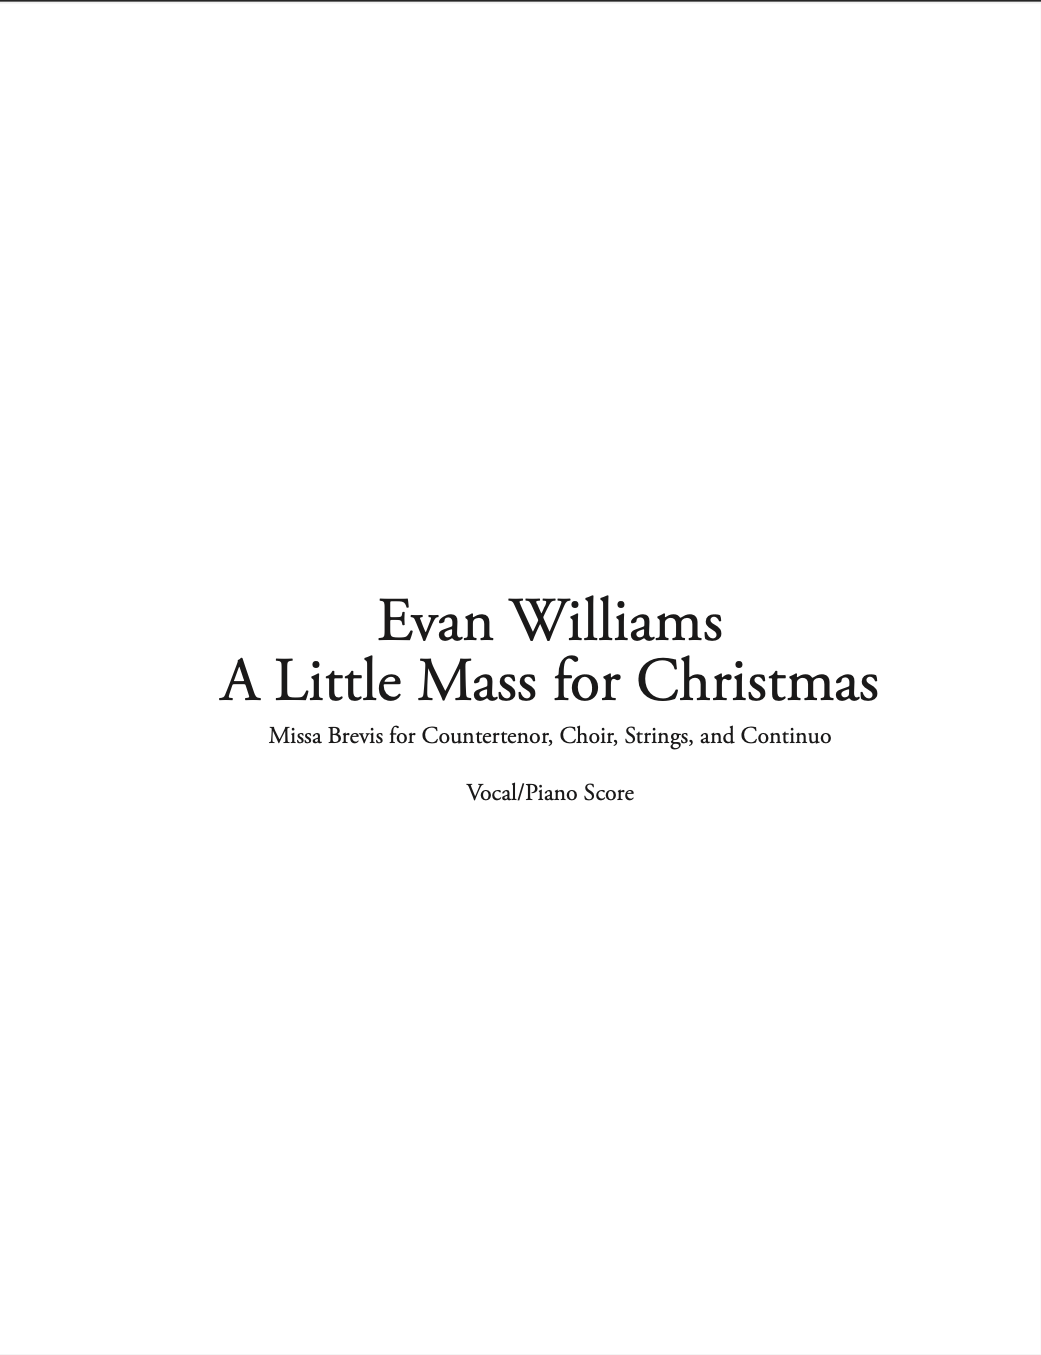 A Little Mass For Christmas (Vocal Part Only) by Evan Williams